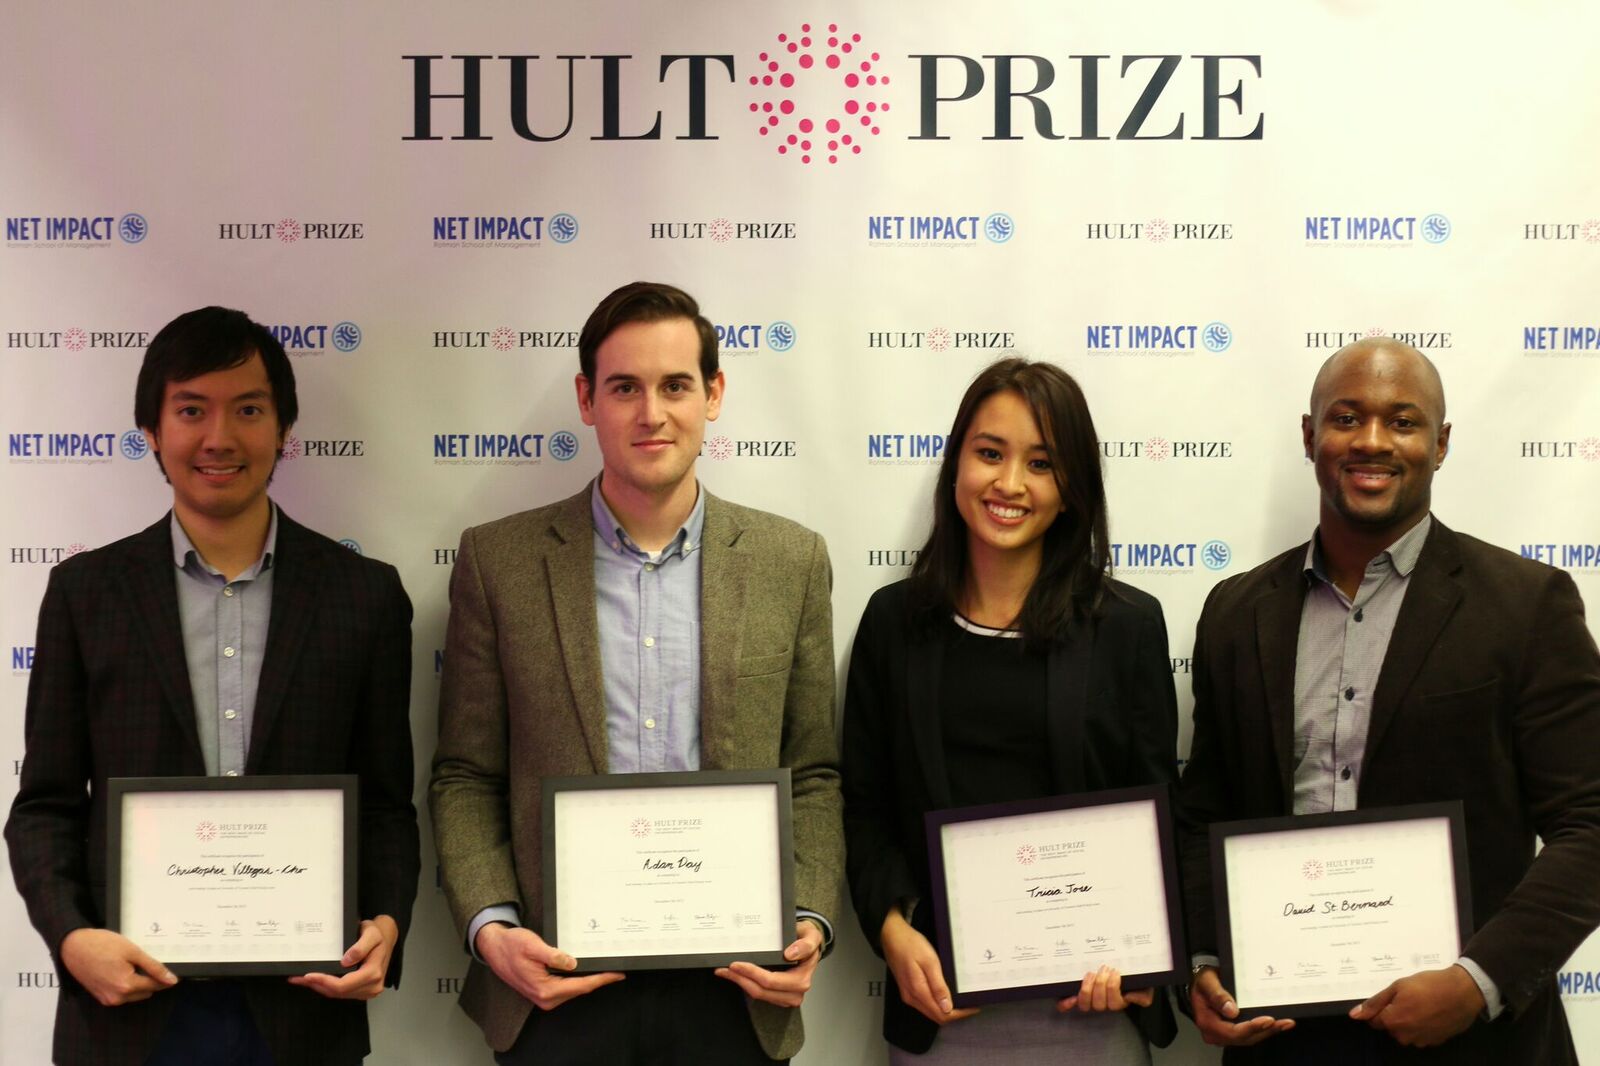 Hult Prize team members from the Rotman School